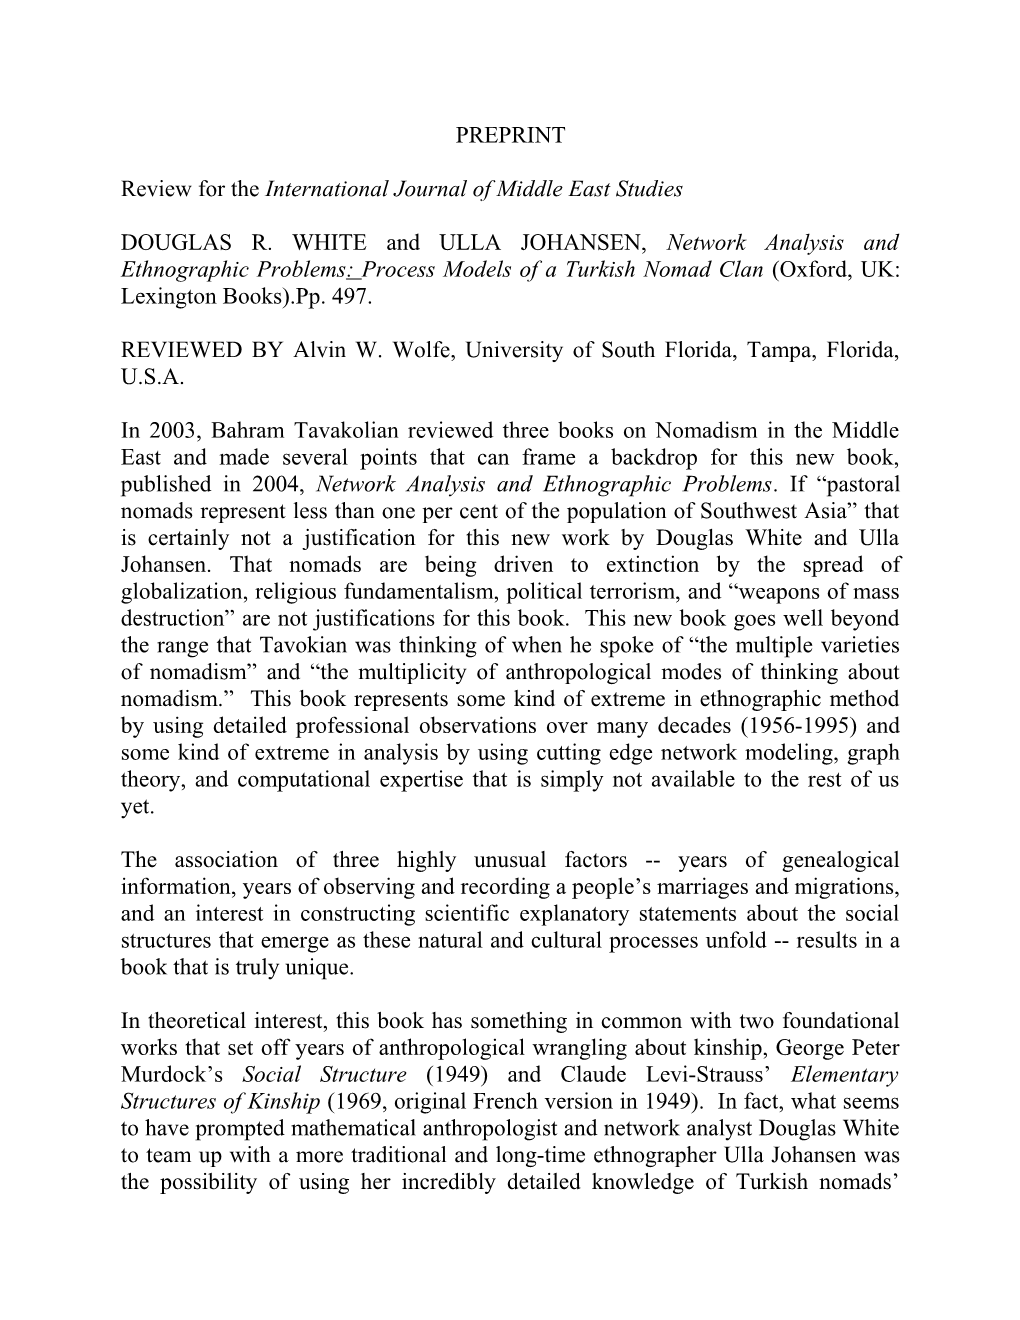 Review for the International Journal of Middle East Studies